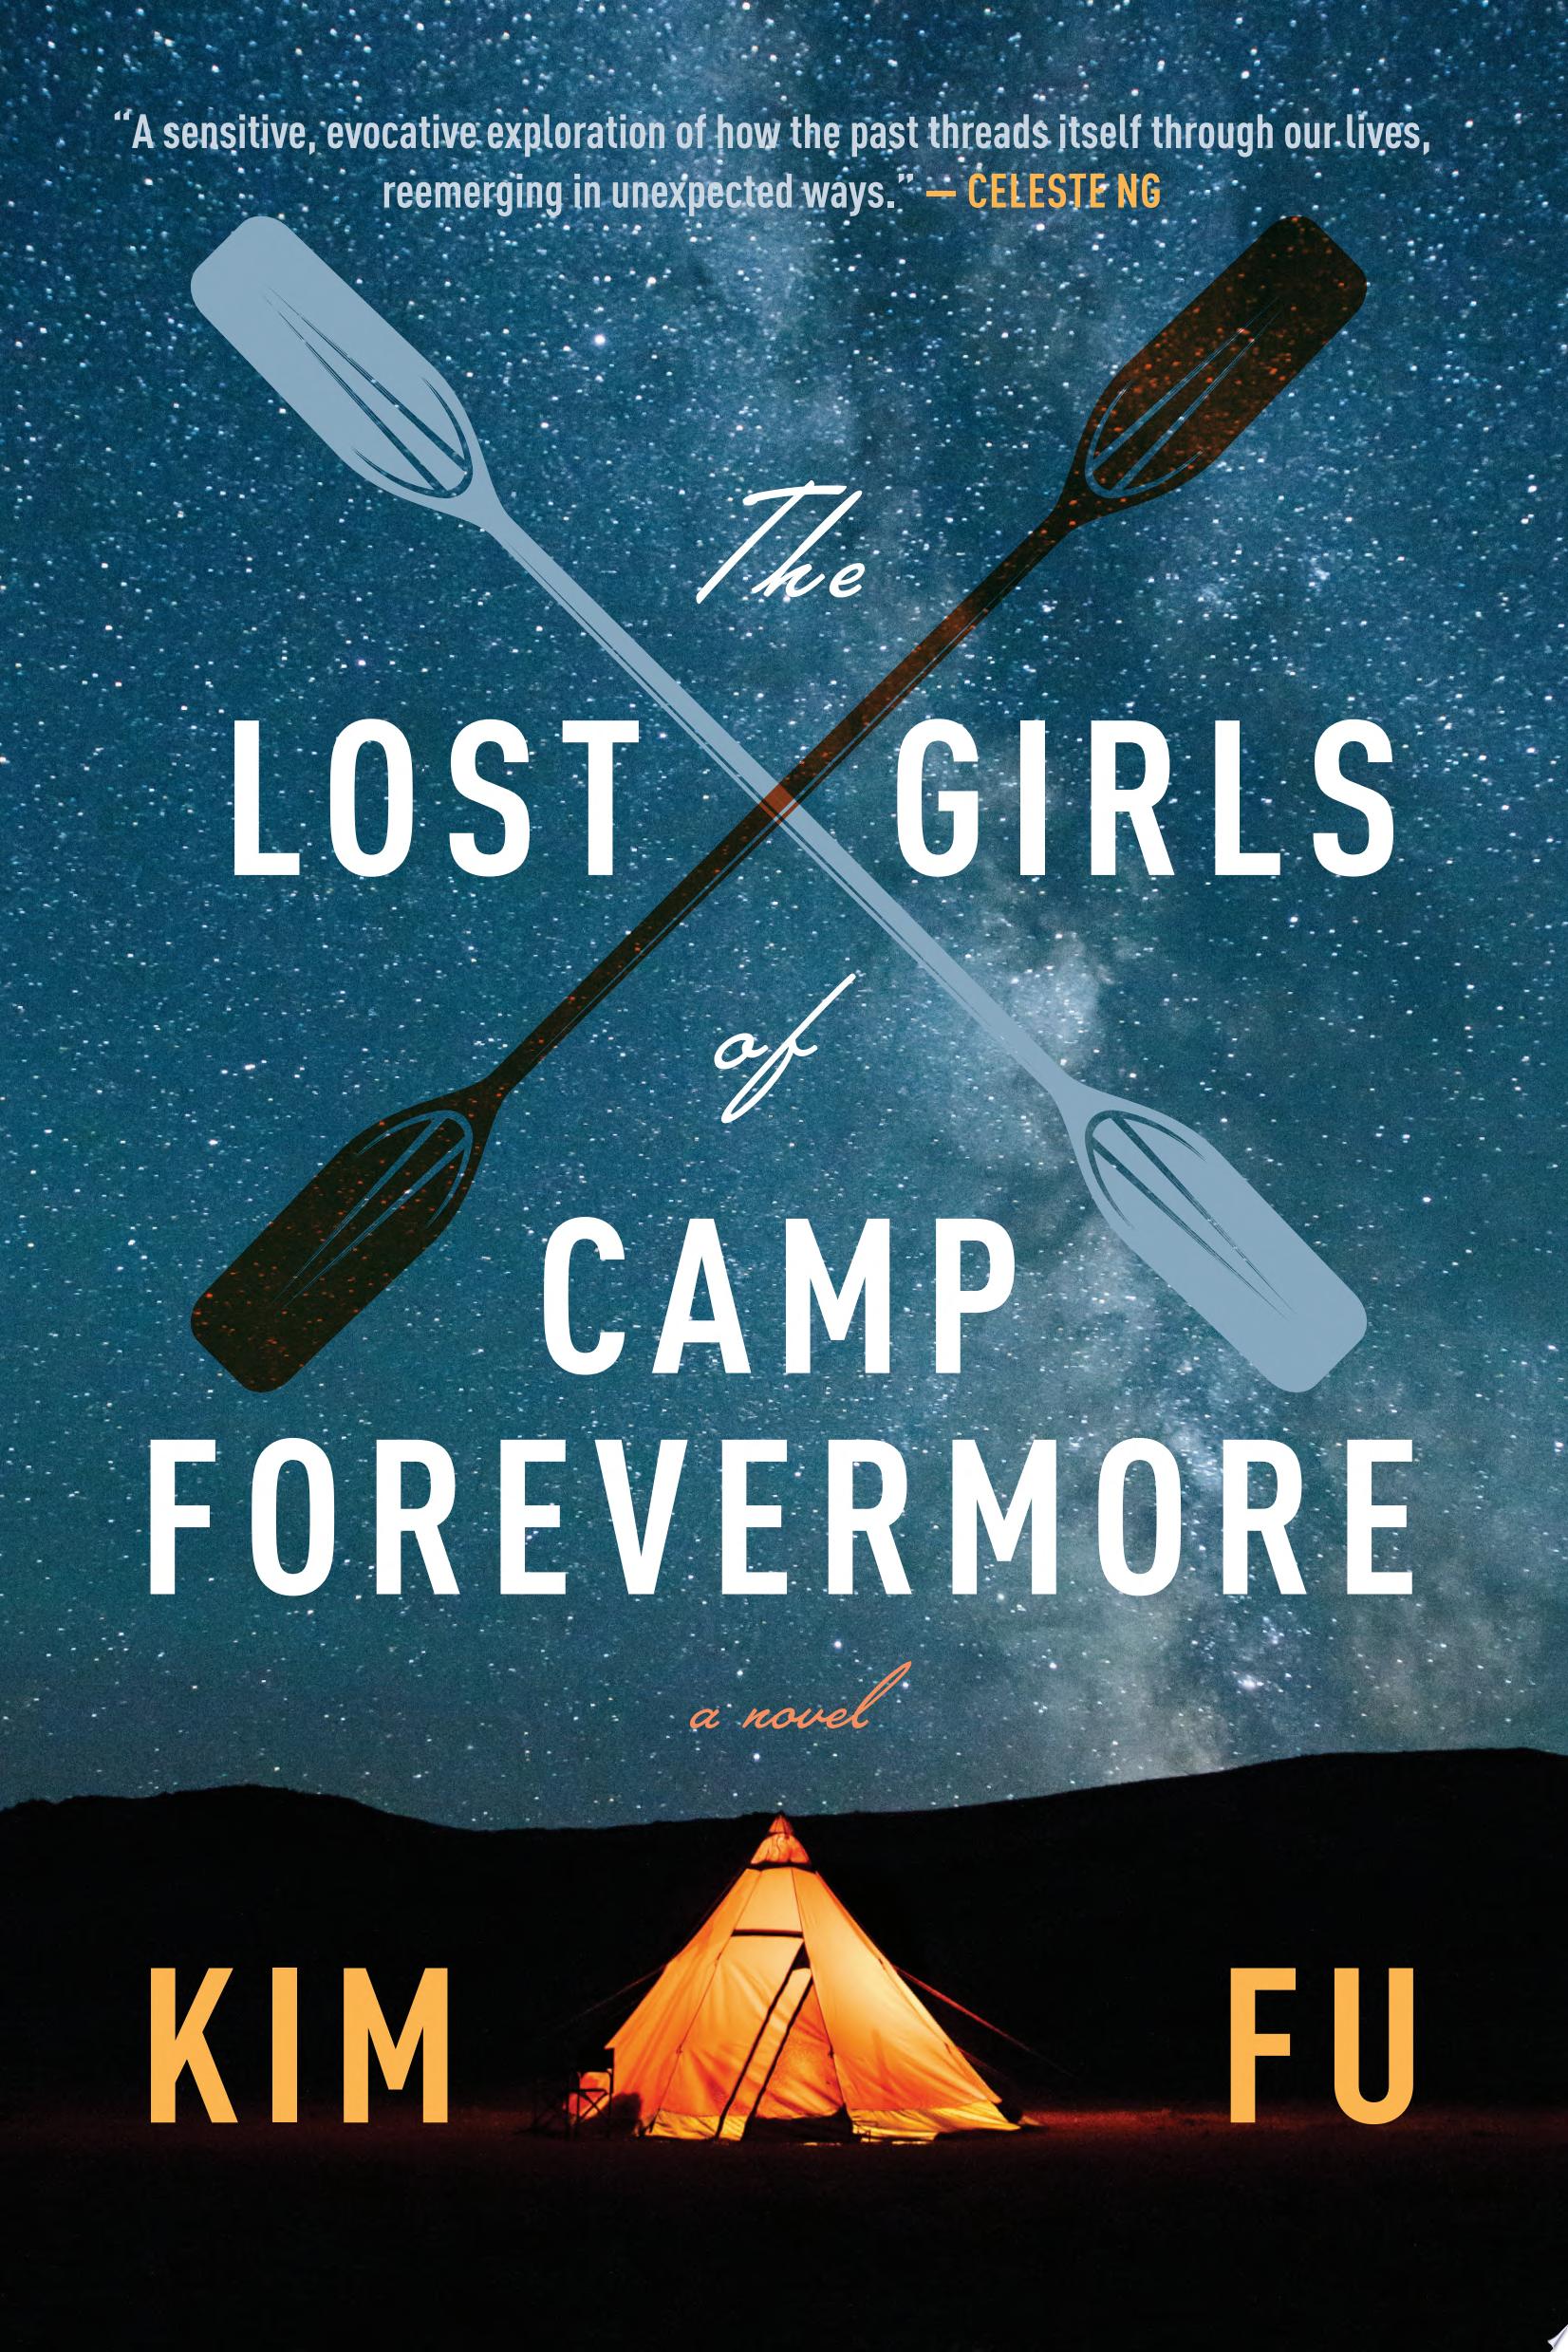 Image for "The Lost Girls of Camp Forevermore"